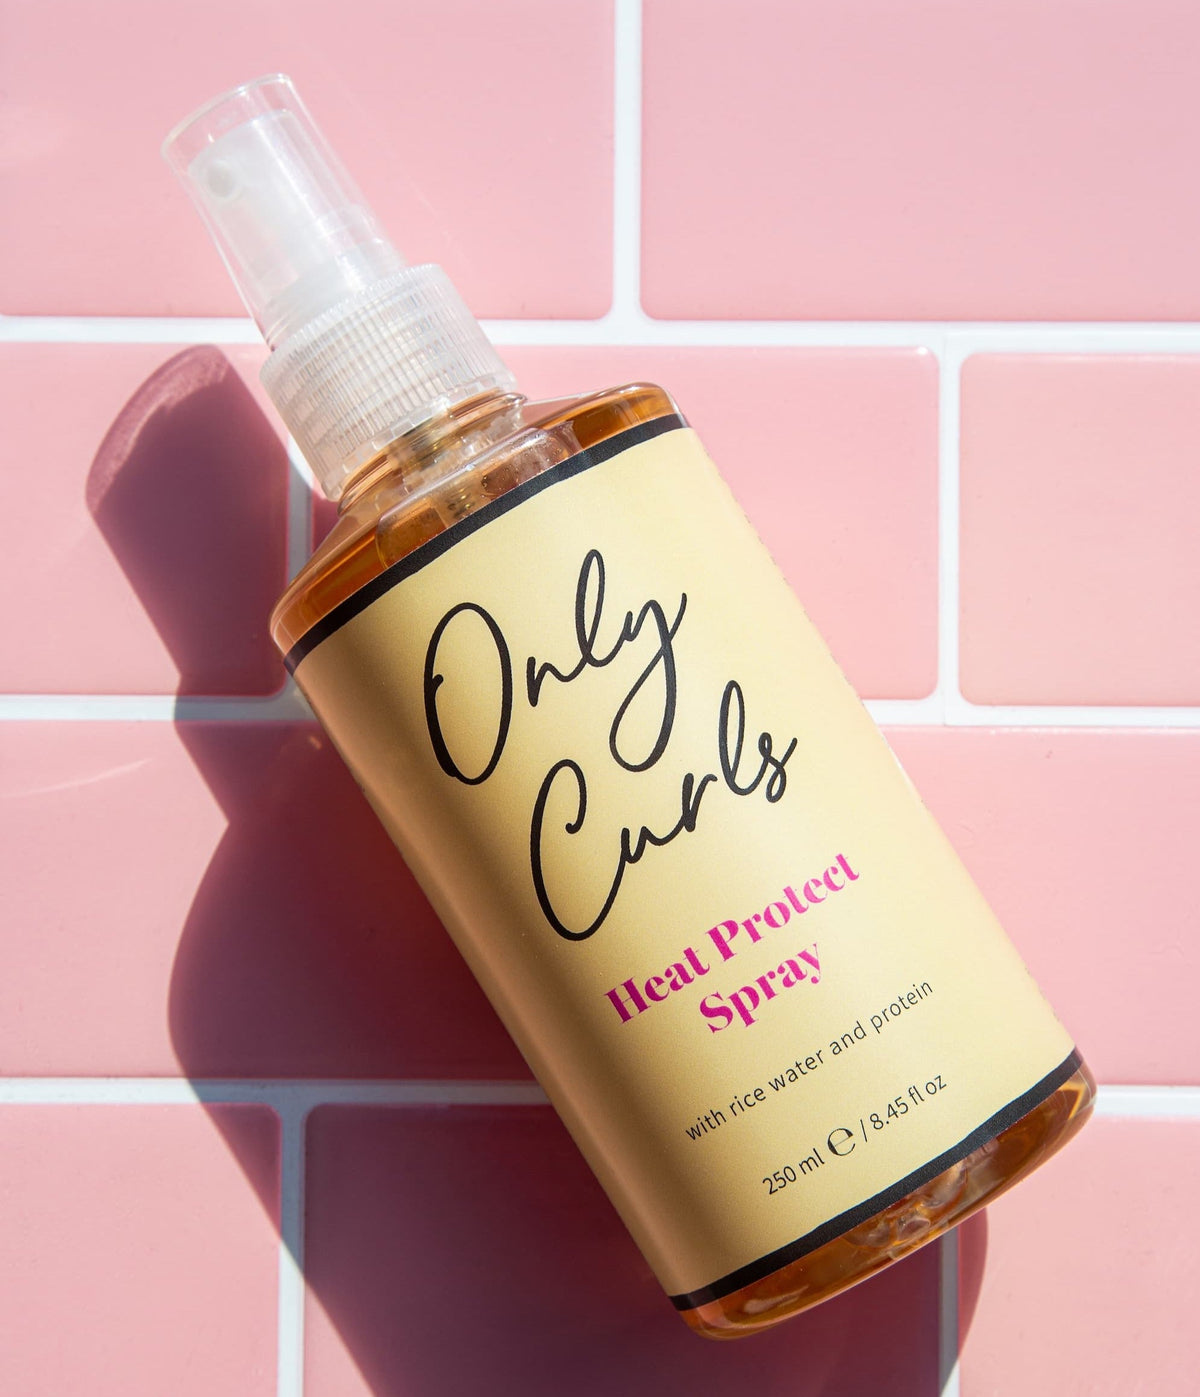 Only Curls Heat Protect Spray - Only Curls